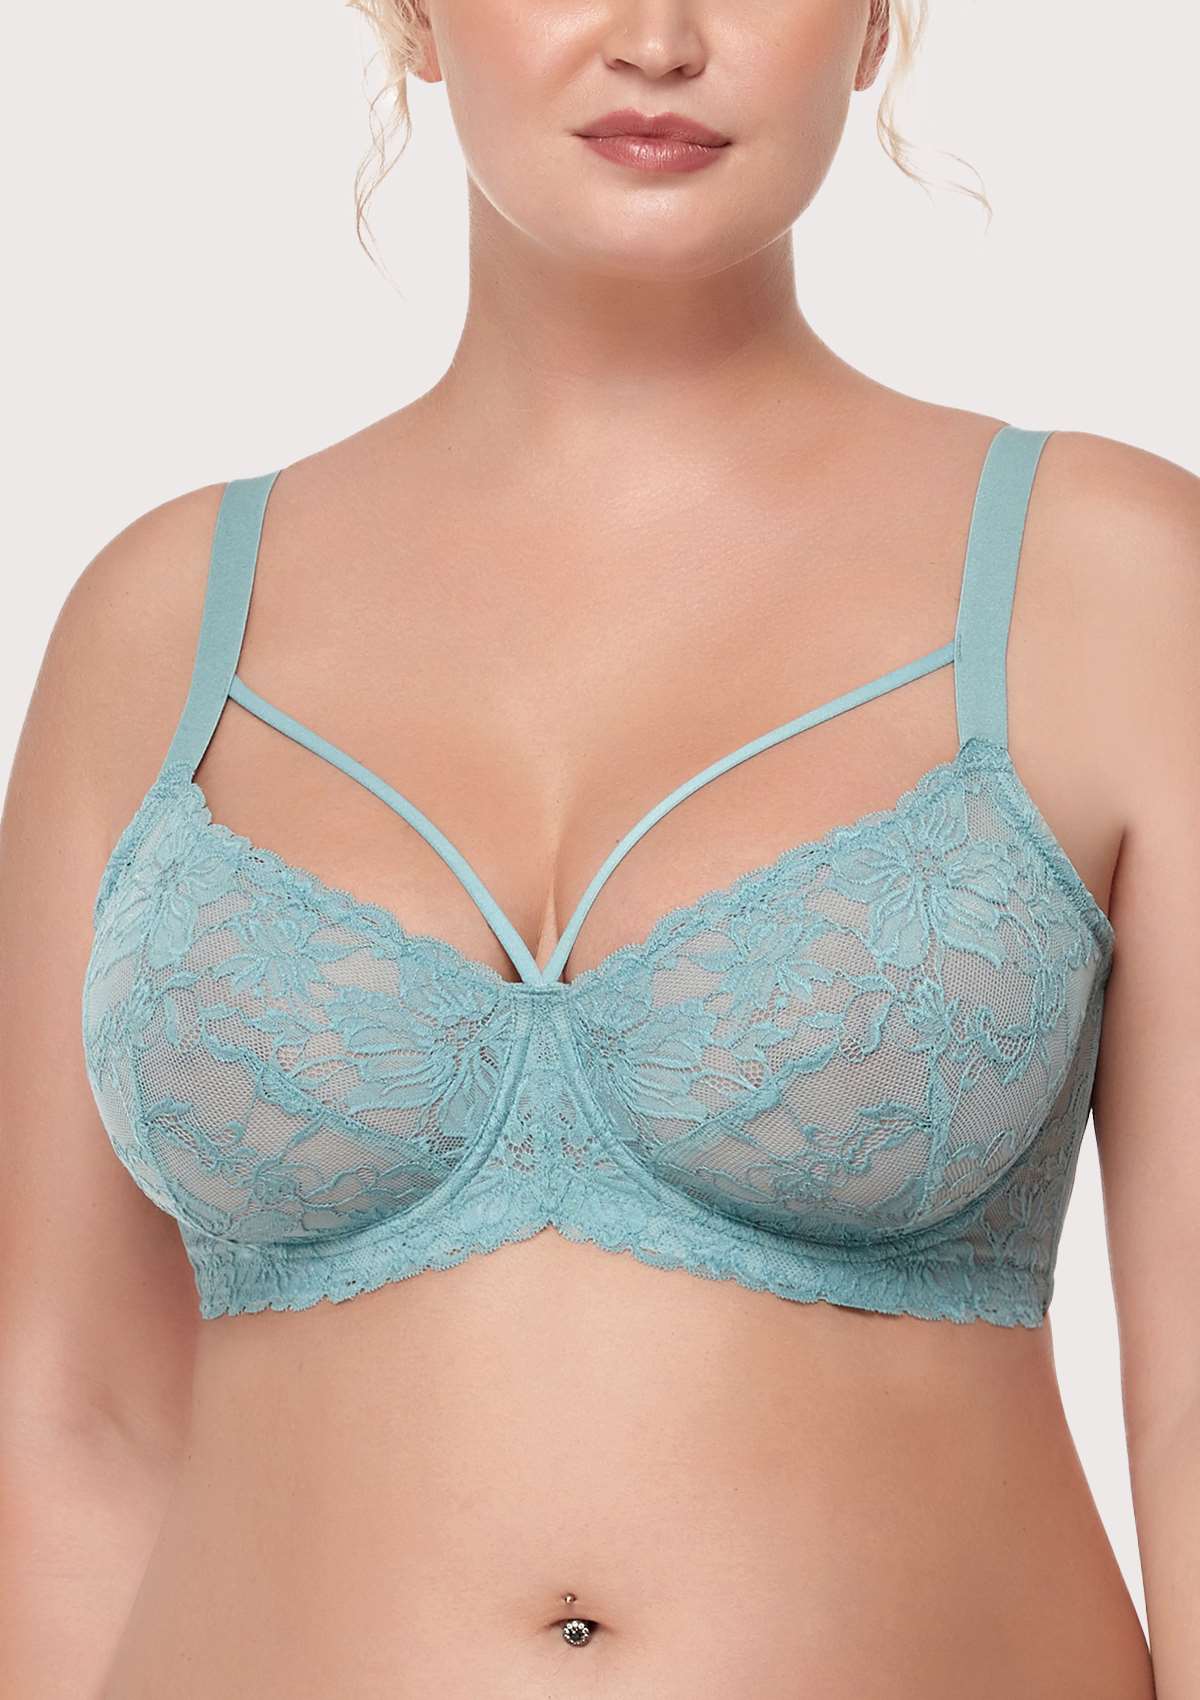 HSIA Pretty In Petals Unlined Lace Bra: Comfortable And Supportive Bra - Crystal Blue / 40 / C